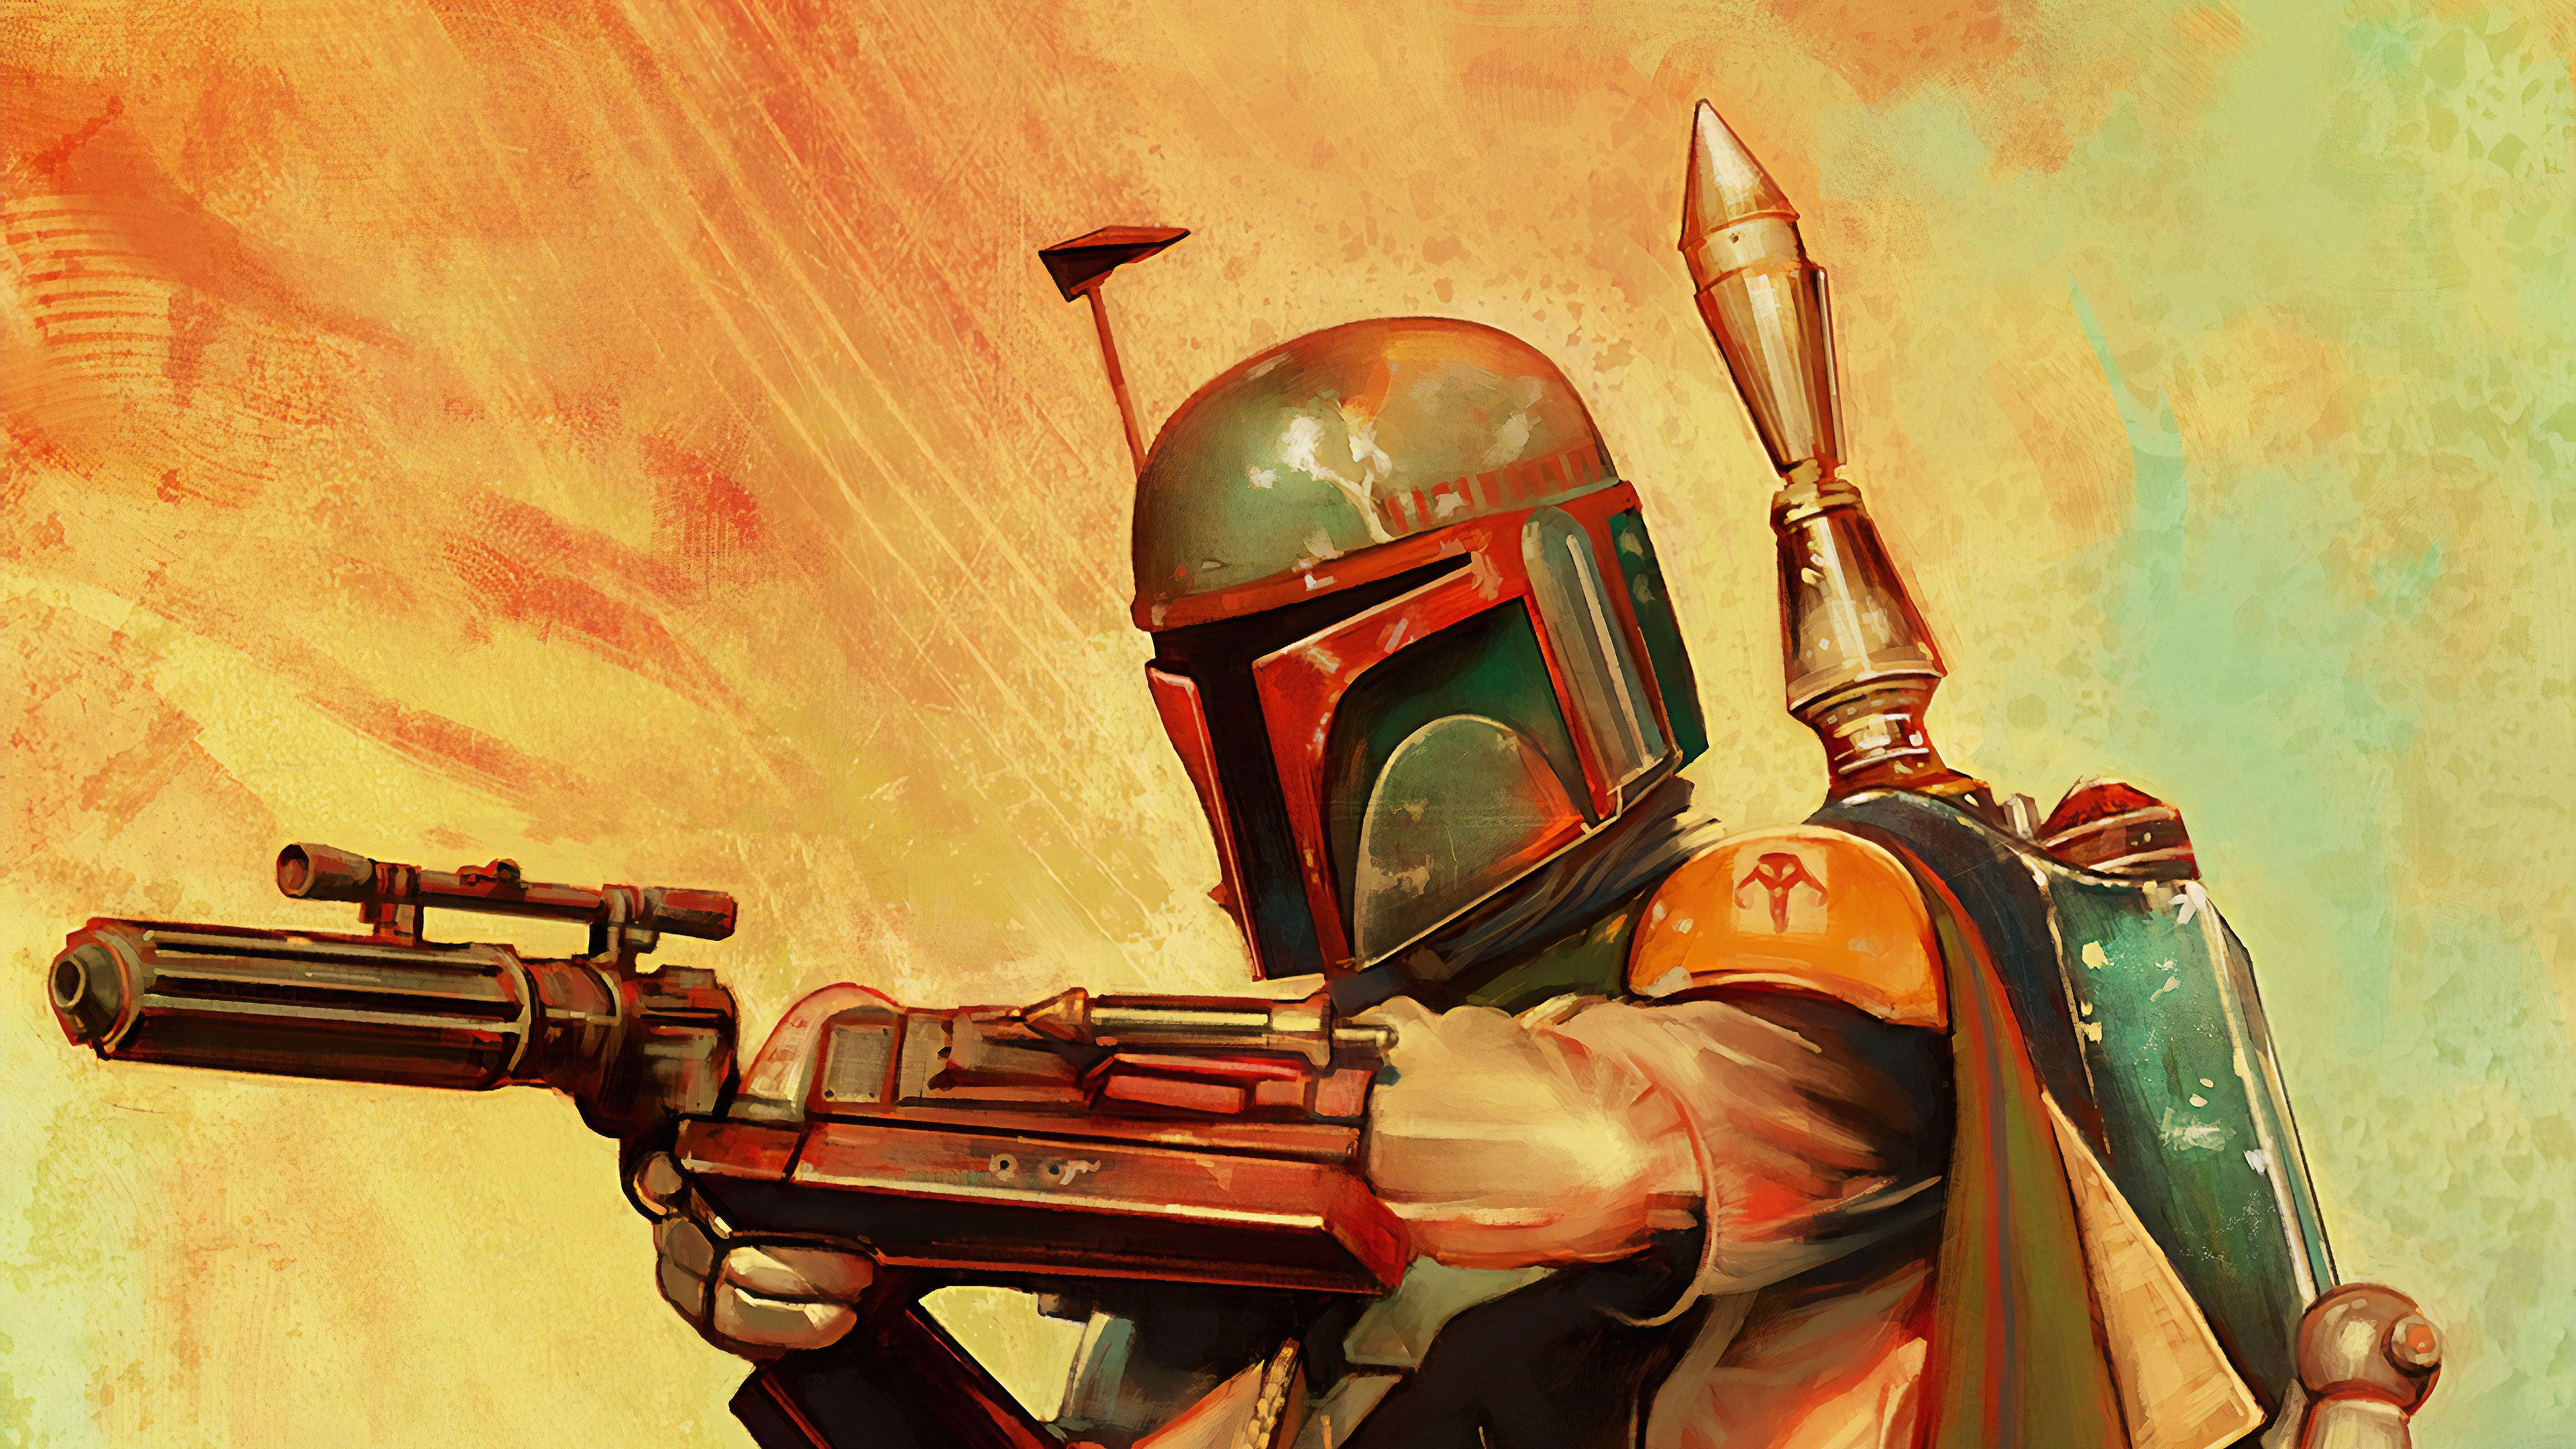 The Mandalorian 2019 4k Art, HD Tv Shows, 4k Wallpapers, Image, Backgrounds, Photos and Pictures